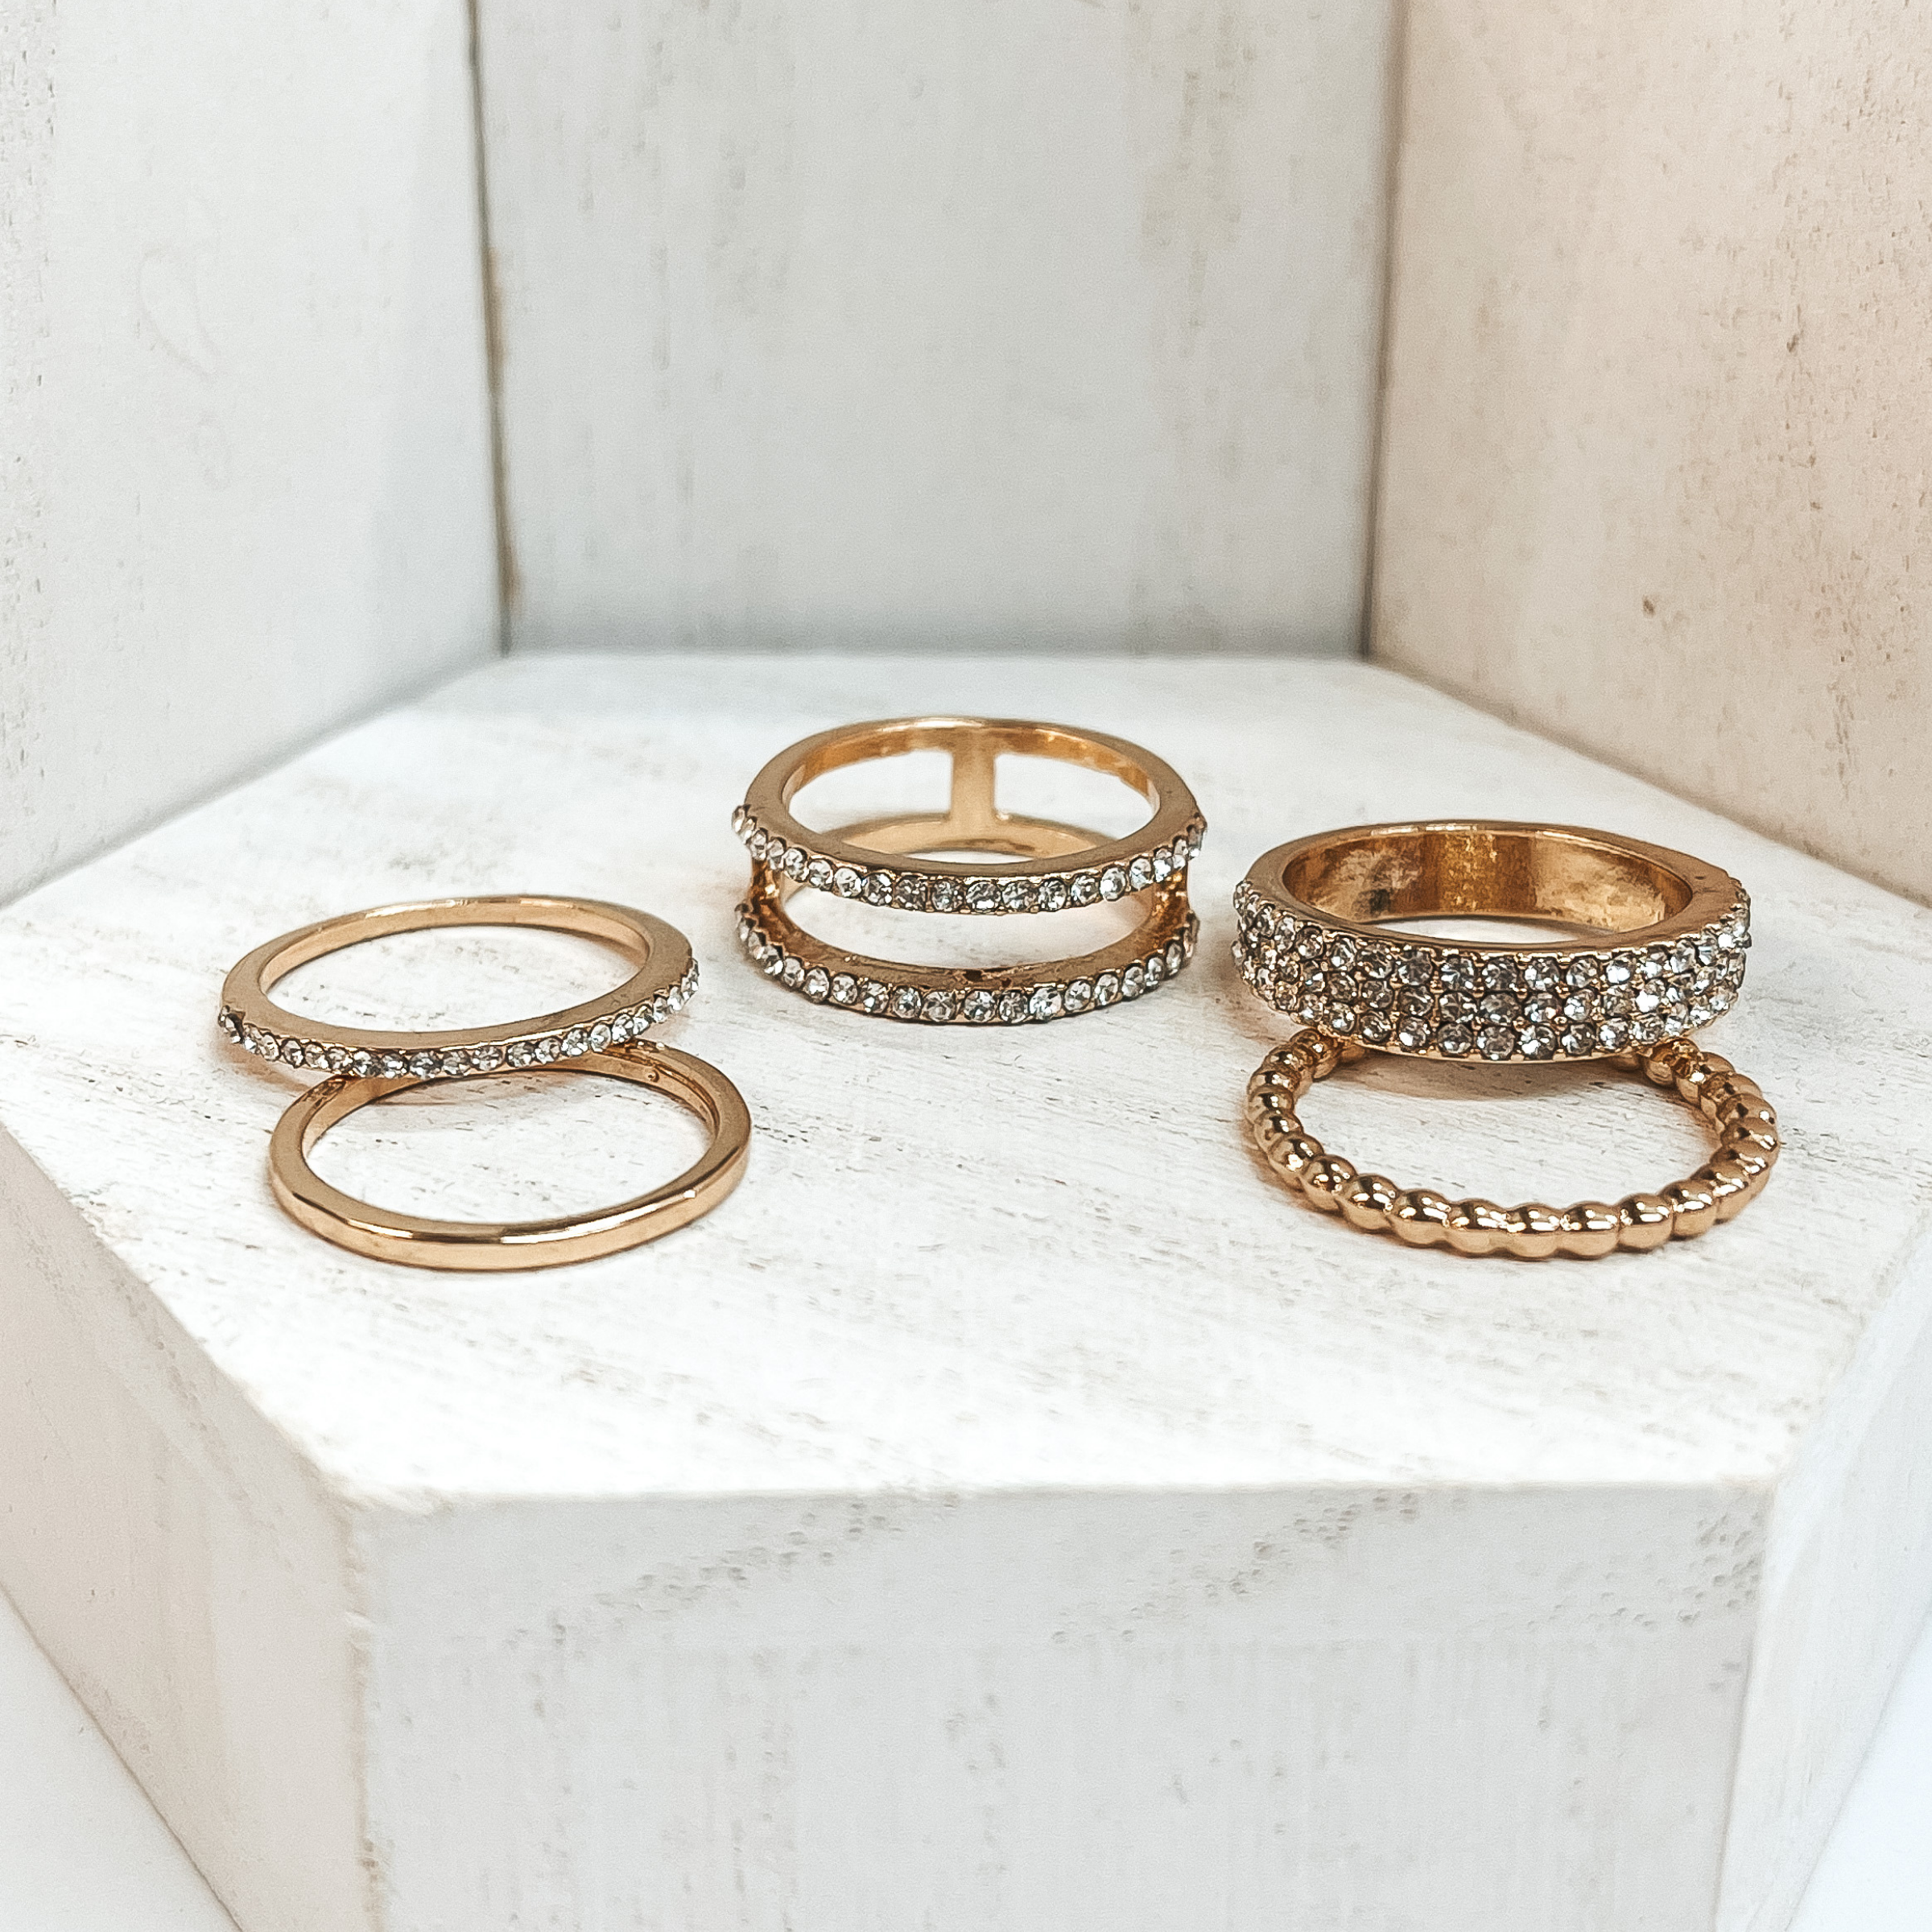 This is a set of five gold rings. All of them but  two rings have crystals in different varieties on  them. One of the rings is bubbled textured and the  other is a solid band. These rings are pictured on a white block and  white background.